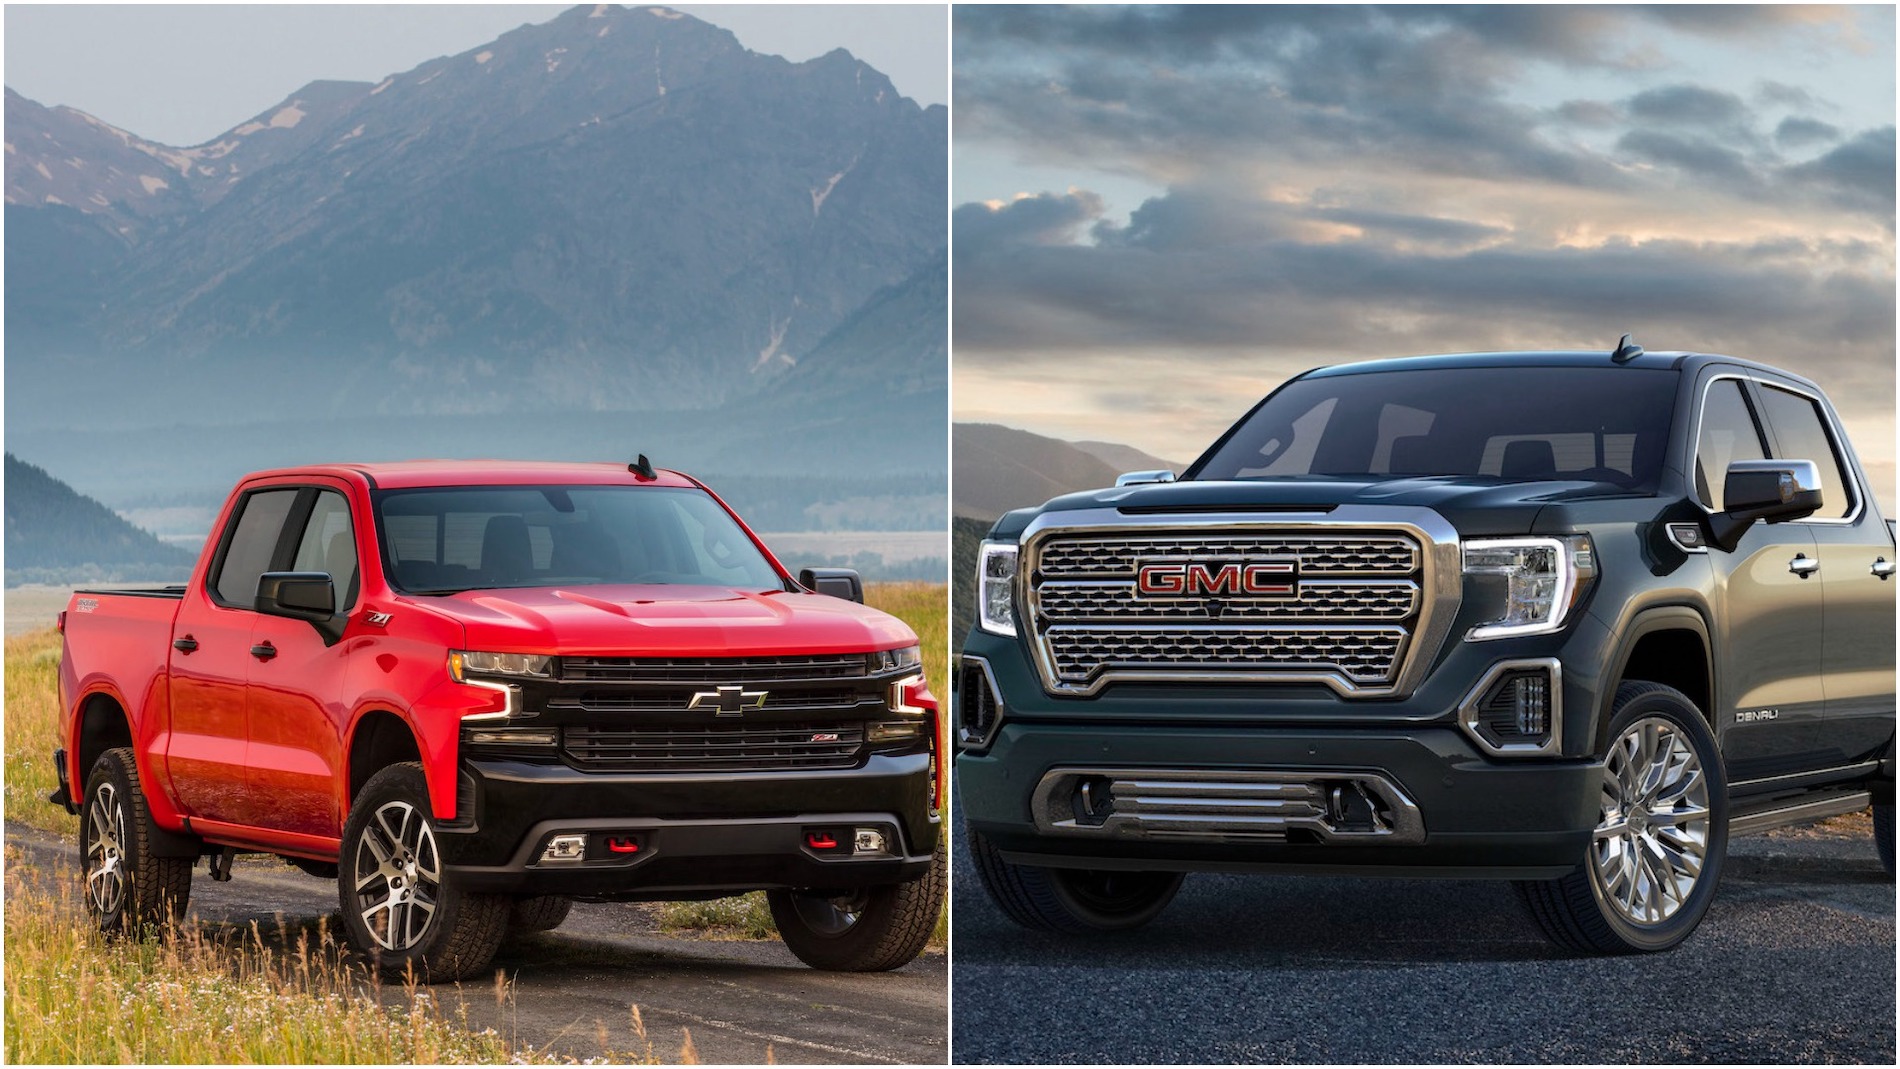 A 2021 Chevy Silverado and a 2021 GMC Sierra facing each other in a photo collage